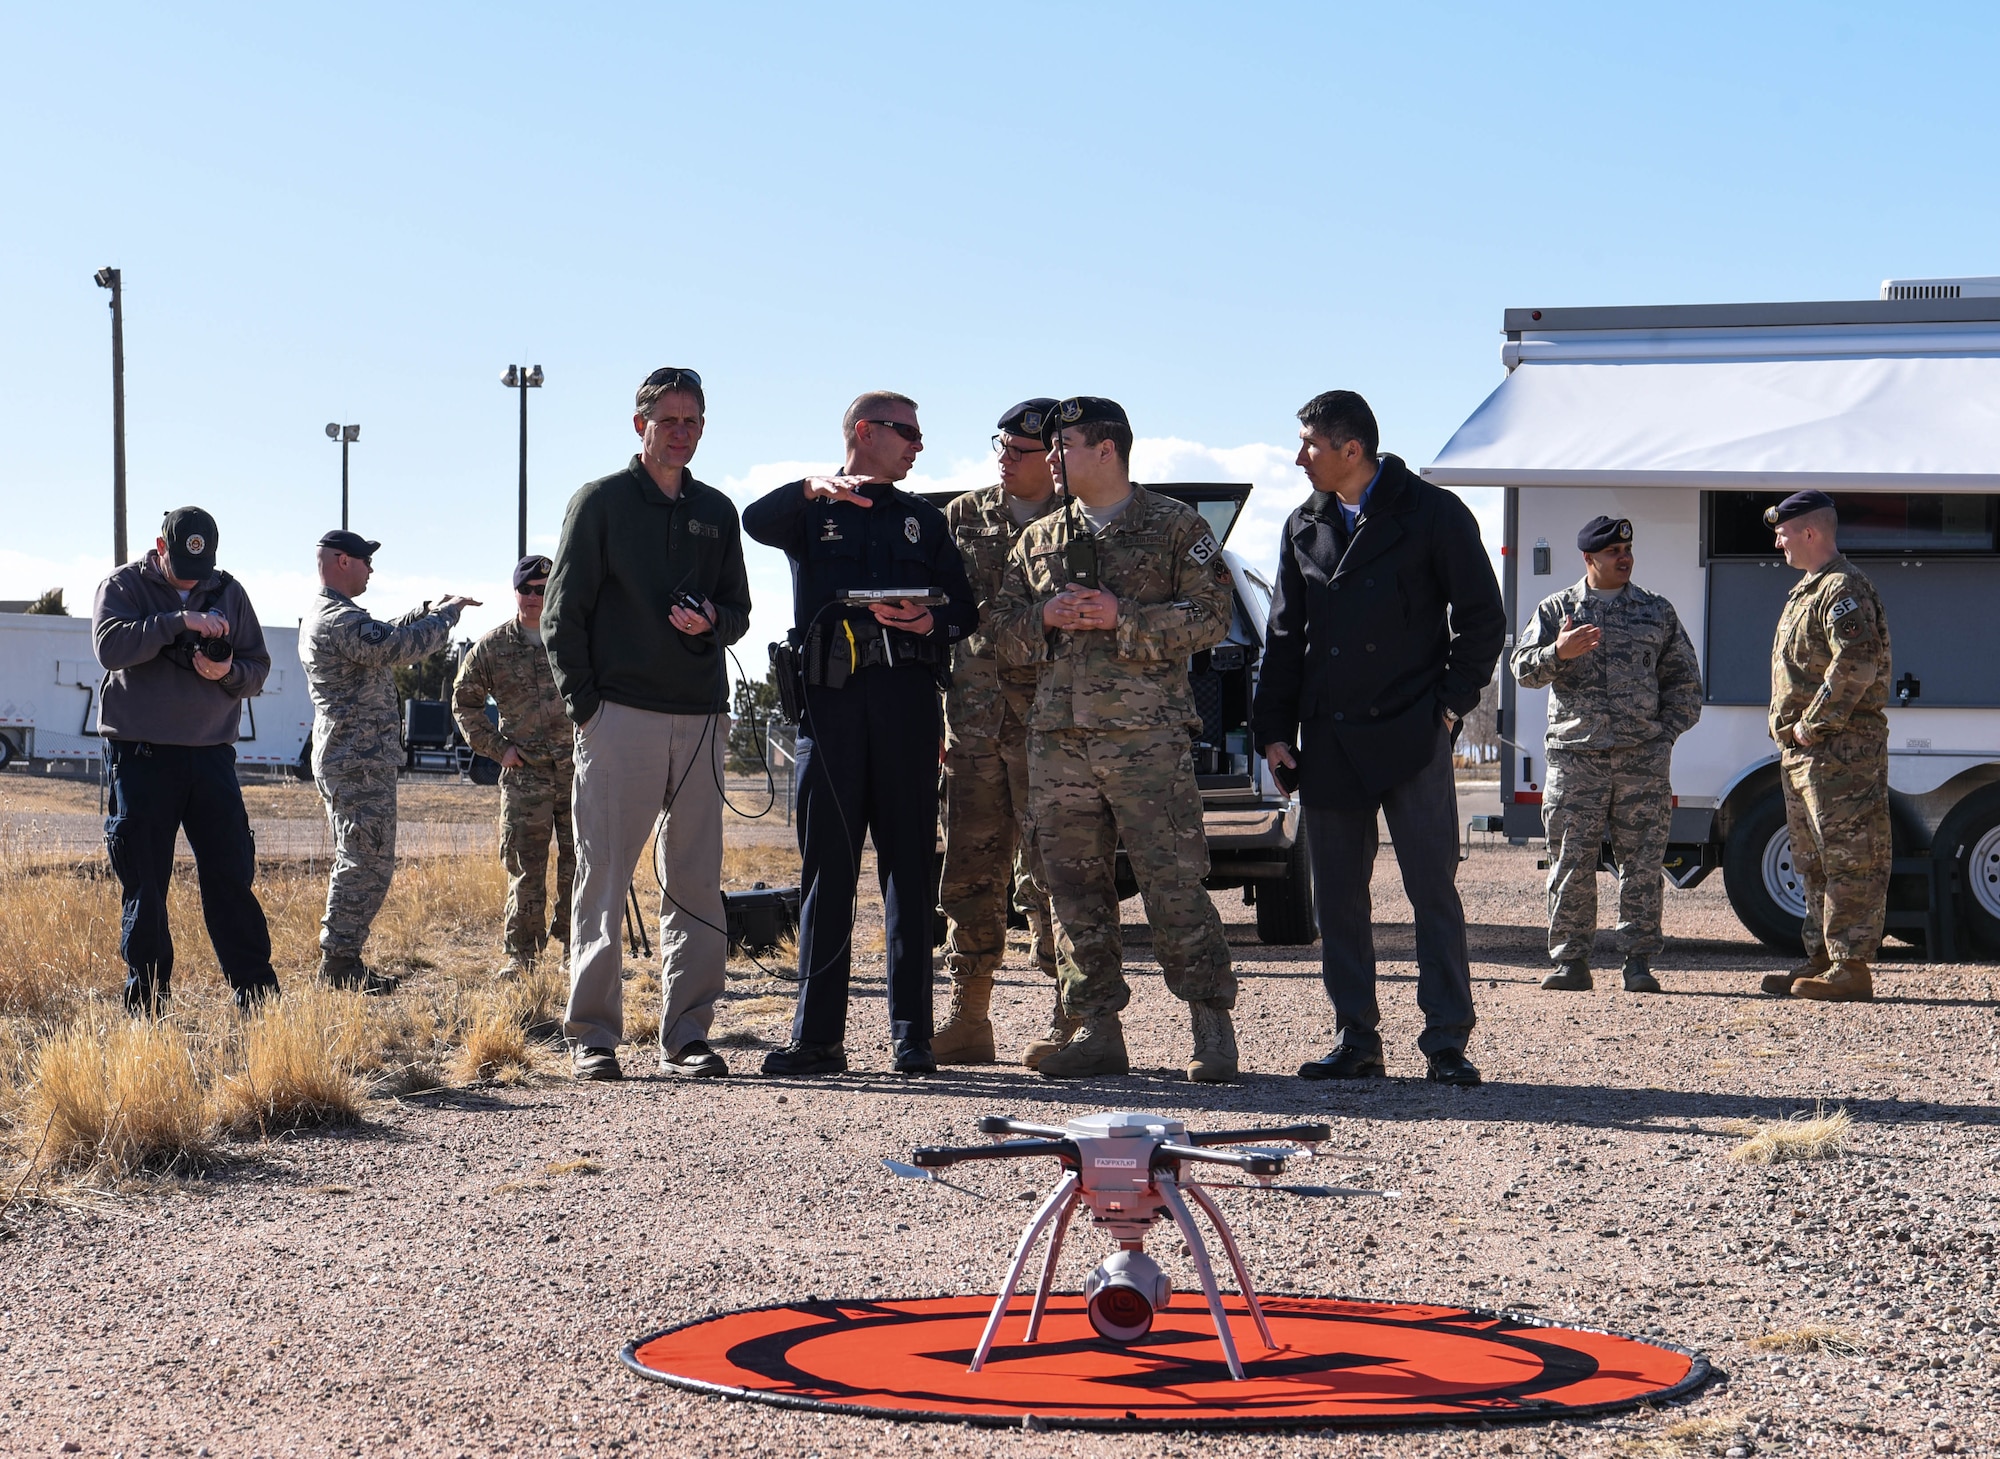 A group of Larimer County police officers converse with a security forces Airman during a flight demonstration at the counter unmanned aerial system Summit on F.E. Warren Air Force Base Wyo., March 13, 2018. Seven off-base federal agencies attended the event to cross-talk with security forces Airmen about their UAS programs. (U.S. Air Force photo by Airman 1st Class Braydon Williams)